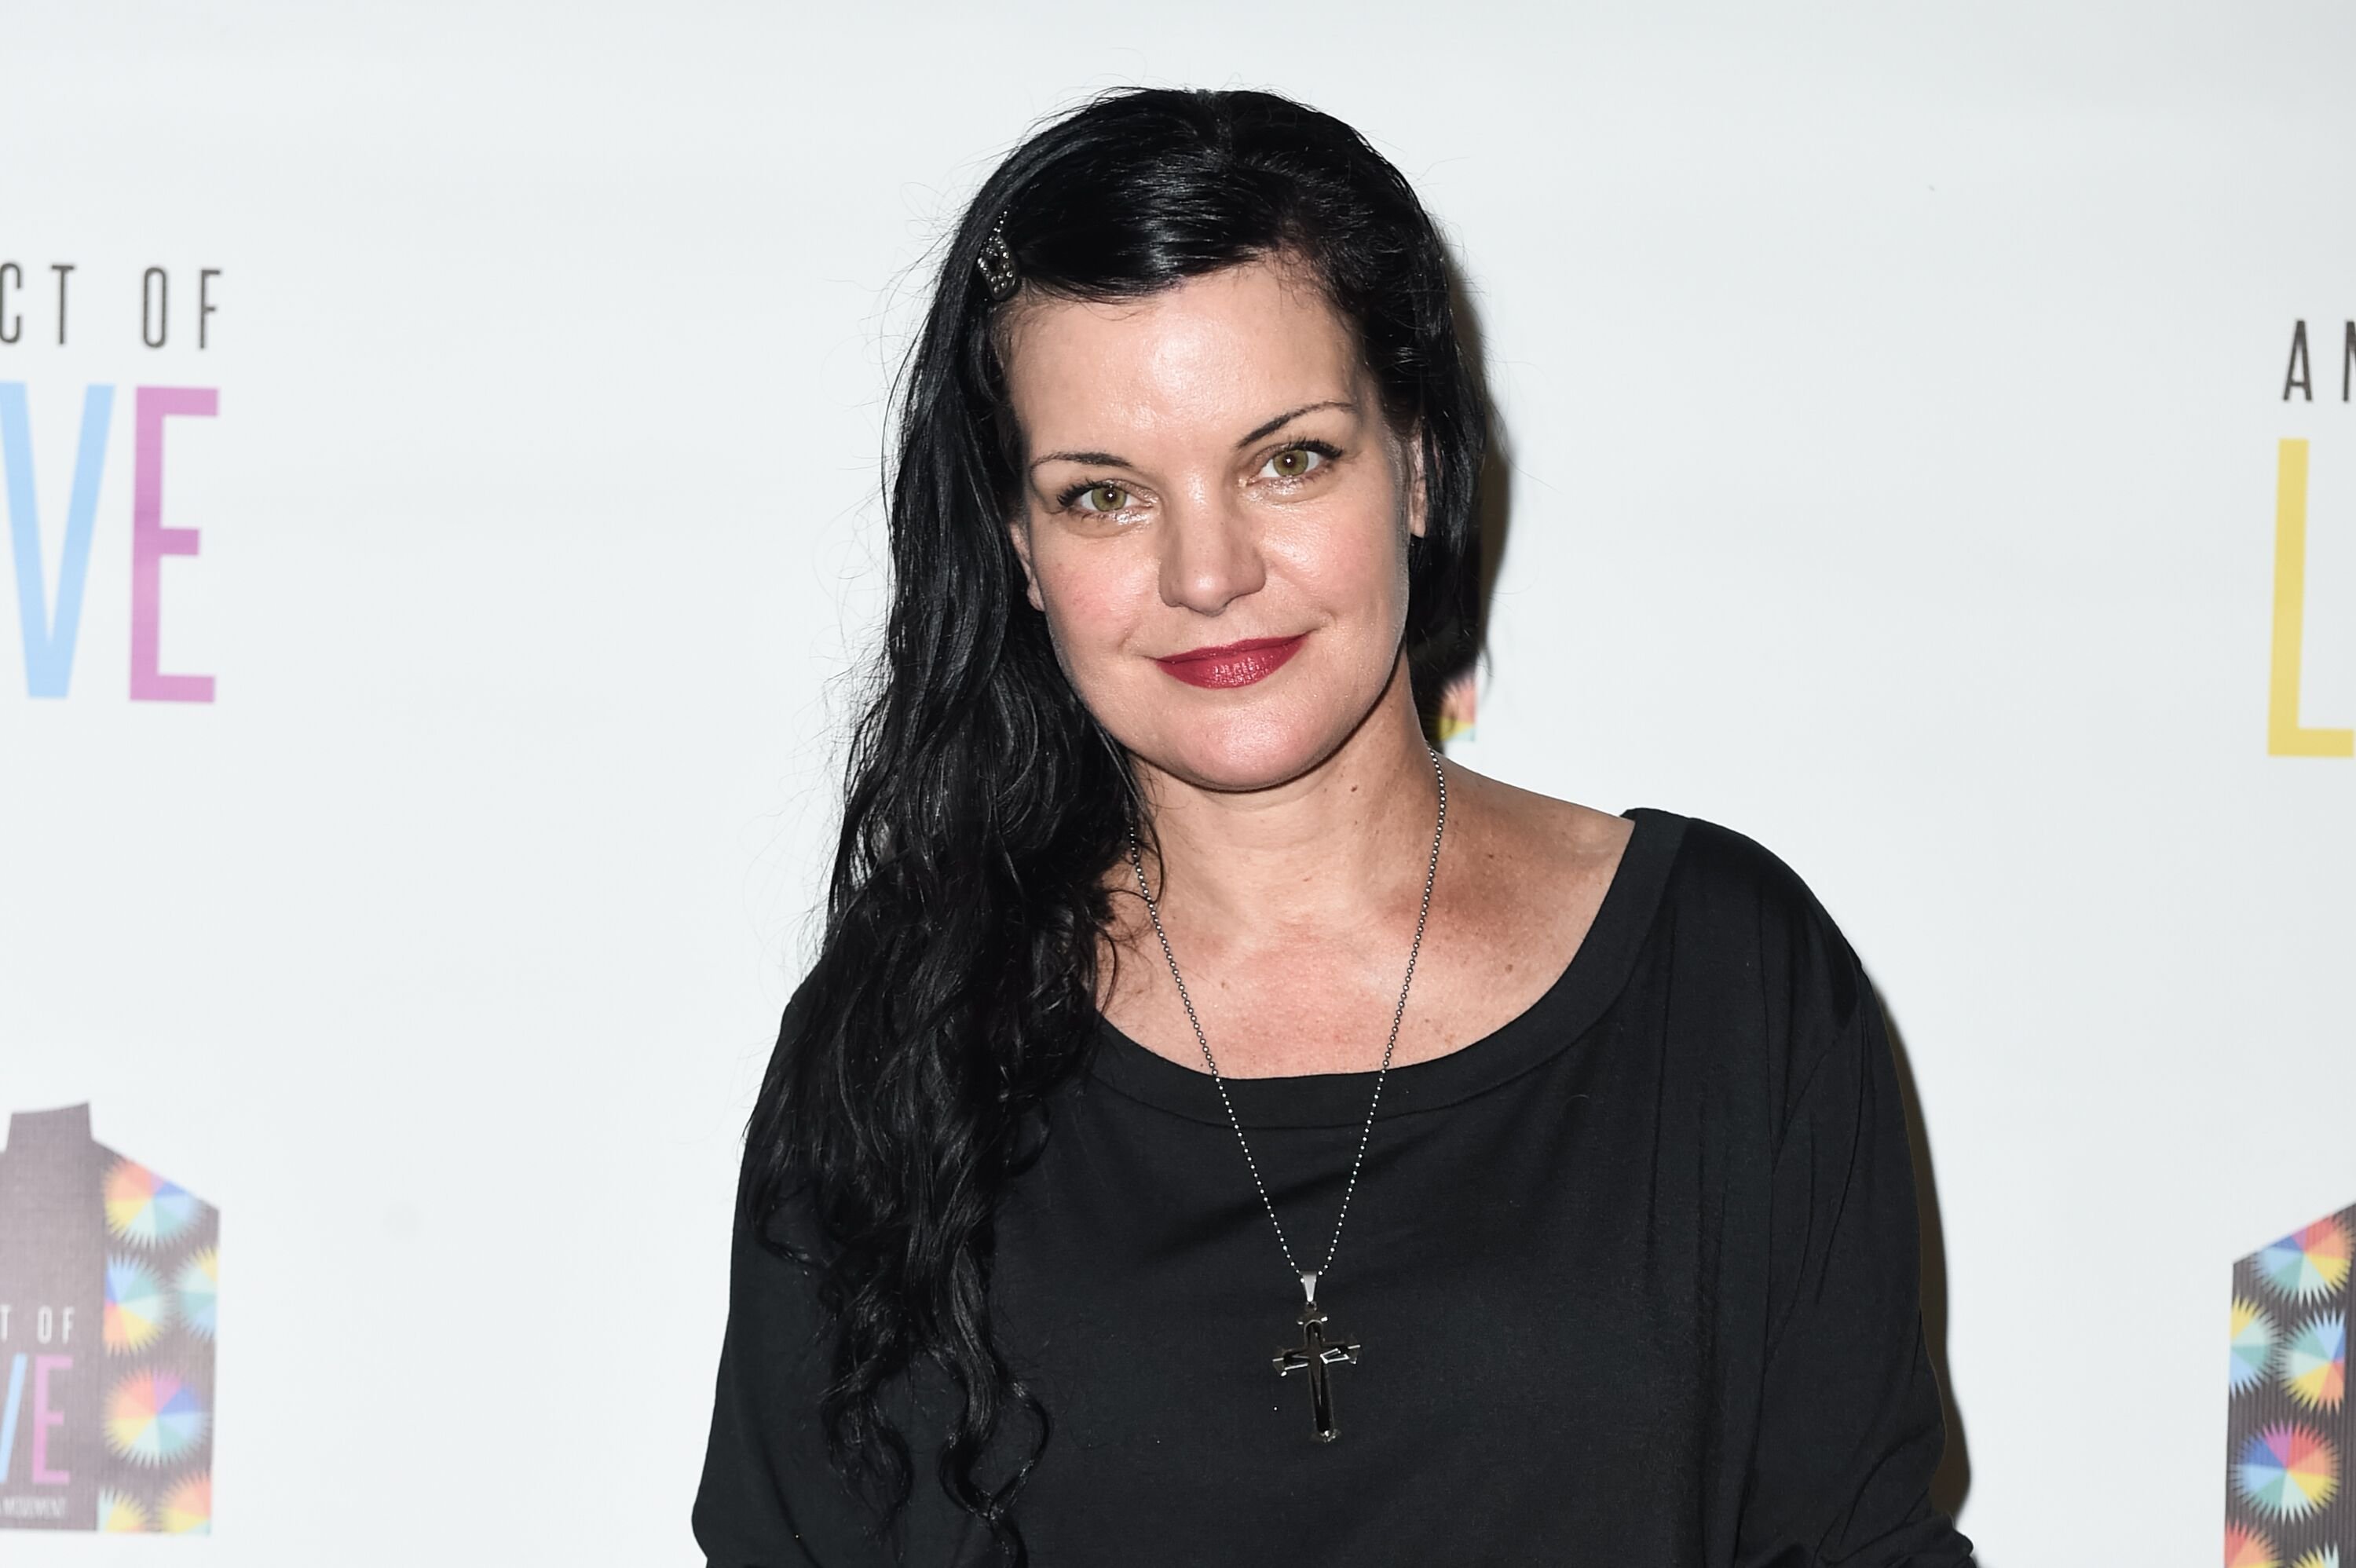  Actress Pauley Perrette attends the screening and Q&A for Chhibber Mann Productions' "An Act Of Love" at Hollywood United Methodist Church on April 3, 2016 in Hollywood, California | Photo: Getty Images